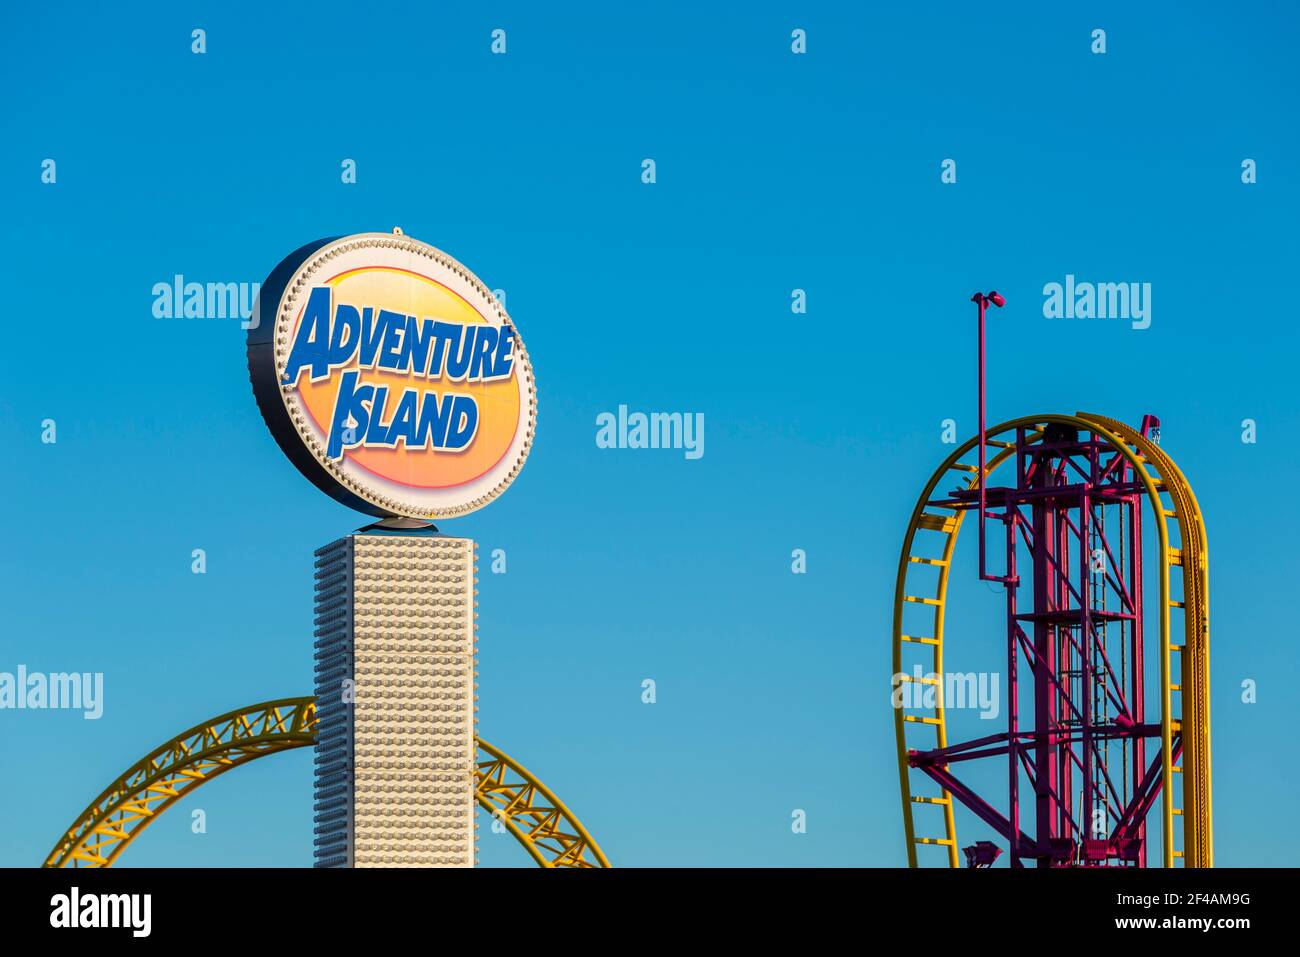 Adventure Island in Southend on Sea, Essex, UK, on a bright, sunny. blue sky day during COVID 19 lockdown. Rage rollercoaster track, empty Stock Photo